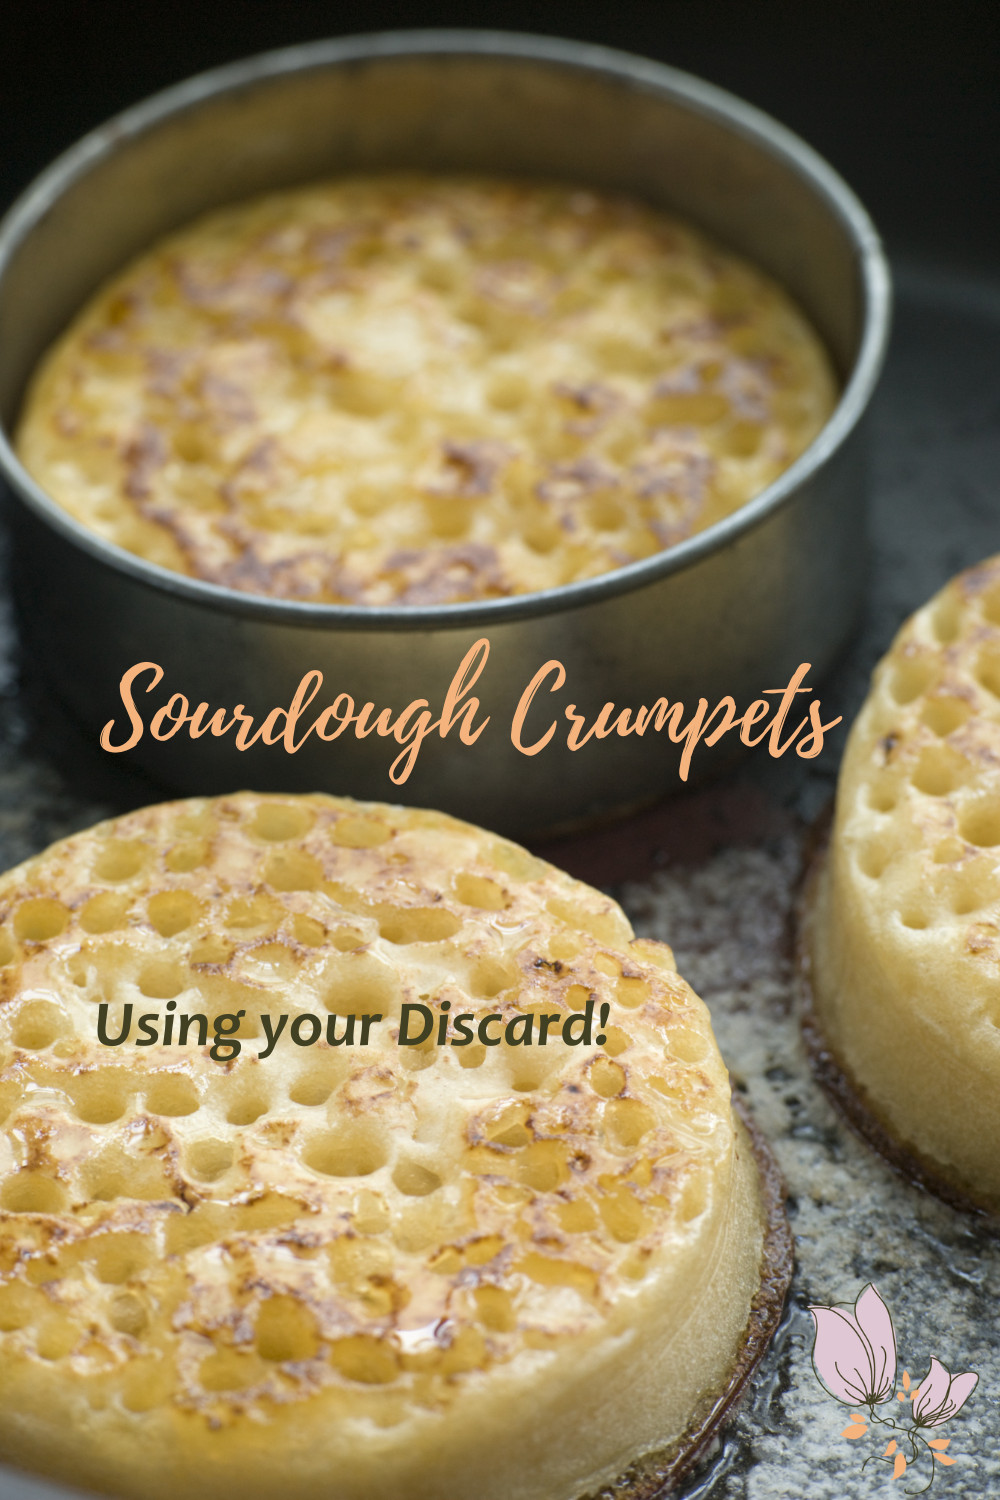 Create Sourdough Crumpets (English Muffins) from Discard! 